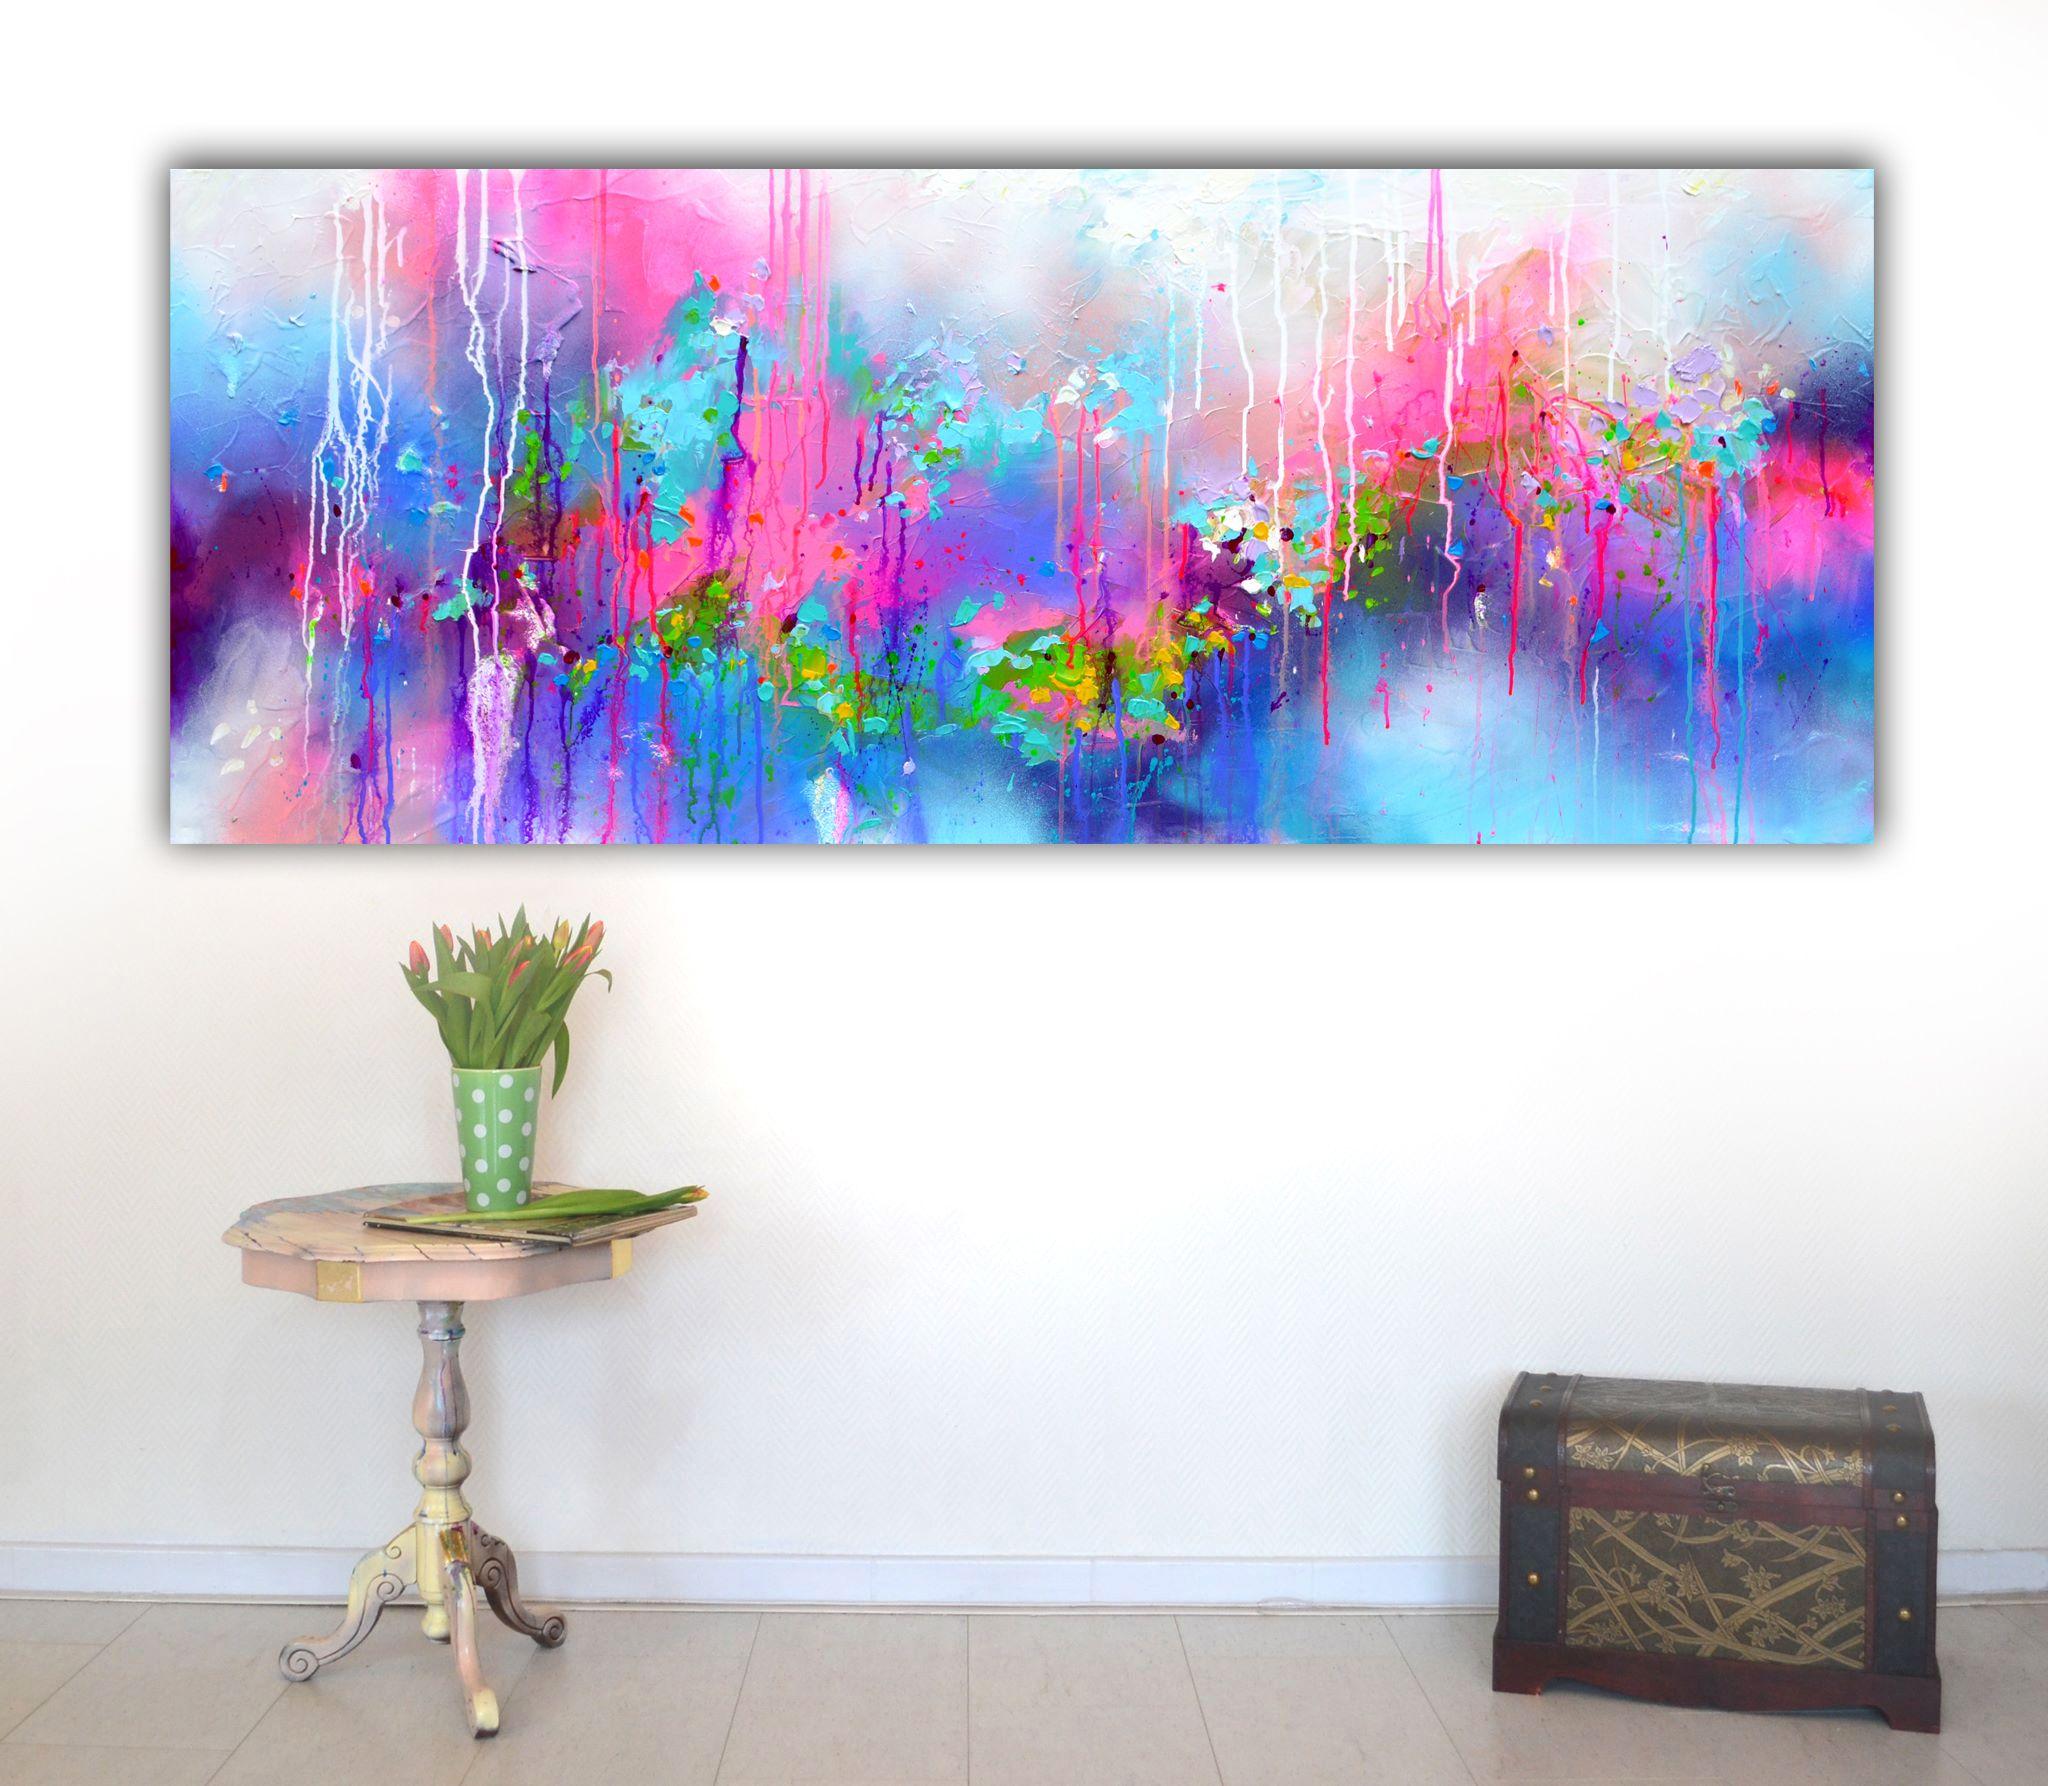 A beautiful modern large colorful vibrant abstract painting, 100% handmade painted, made with professional varnished acrylics and Amsterdam acrylic sprays on stretched heavy 3D (4cm) canvas. In this beautiful composition you will find warm pastel